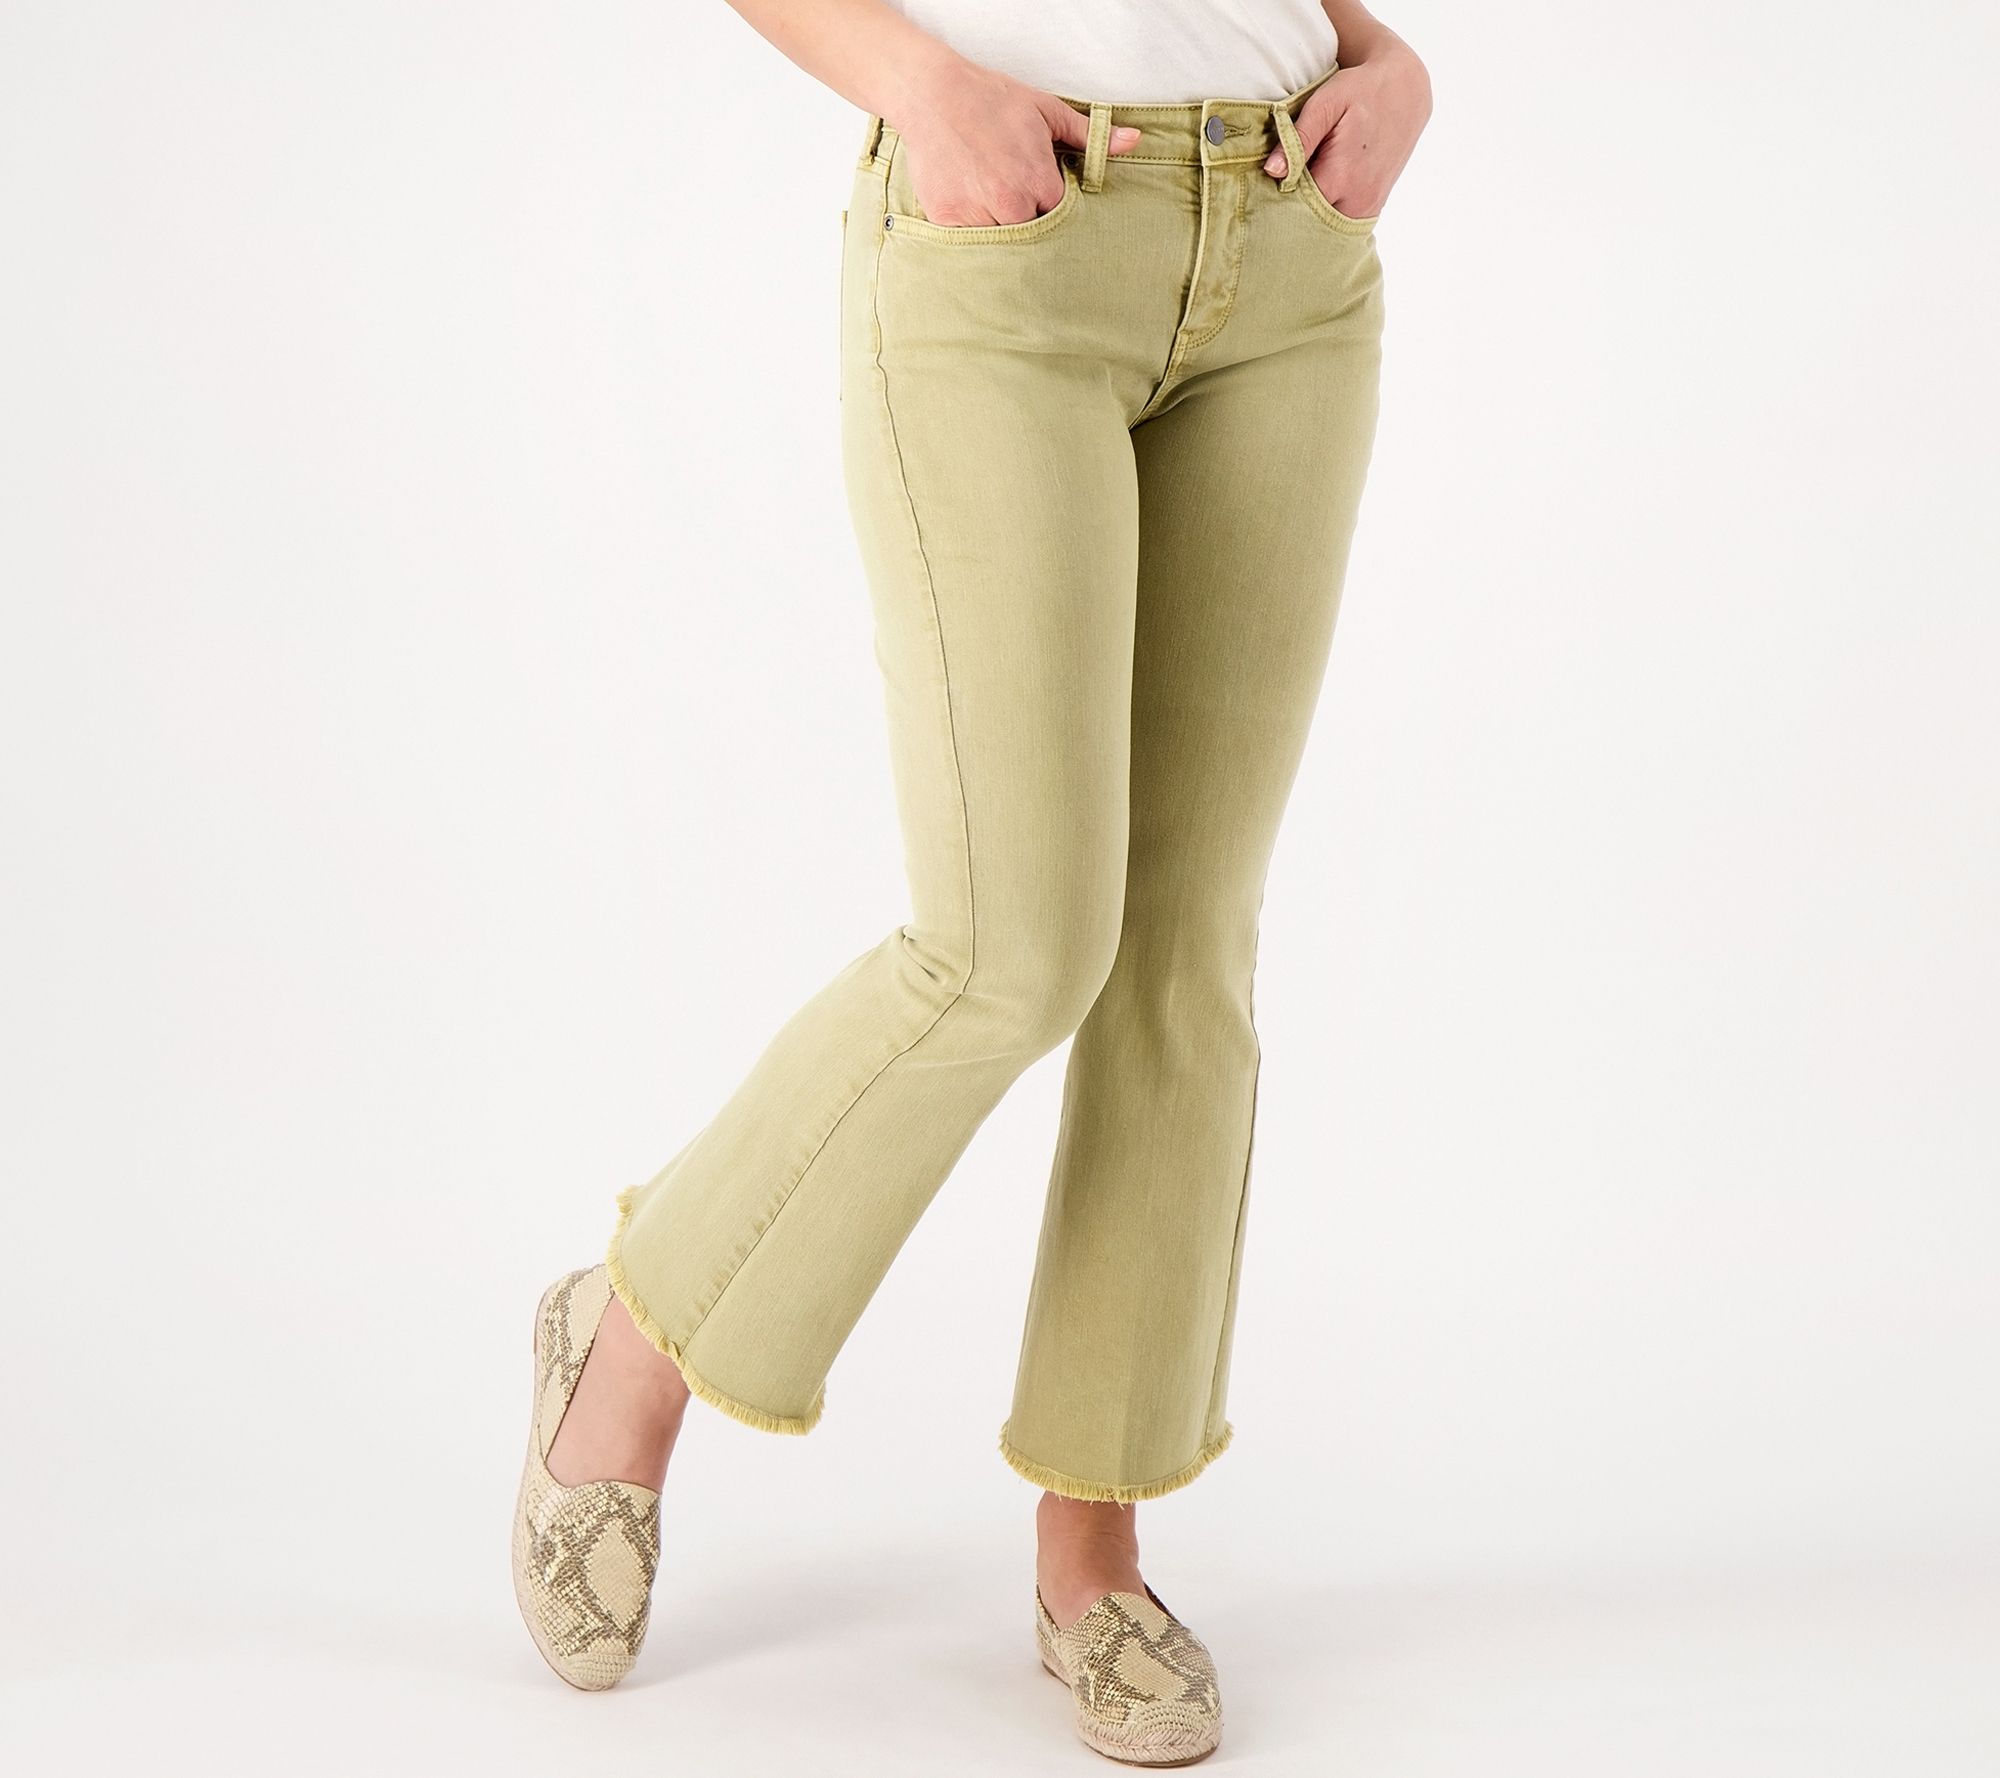 NYDJ Ava Daring Ankle Flare Jeans with Fray Hem- Olive Oil 